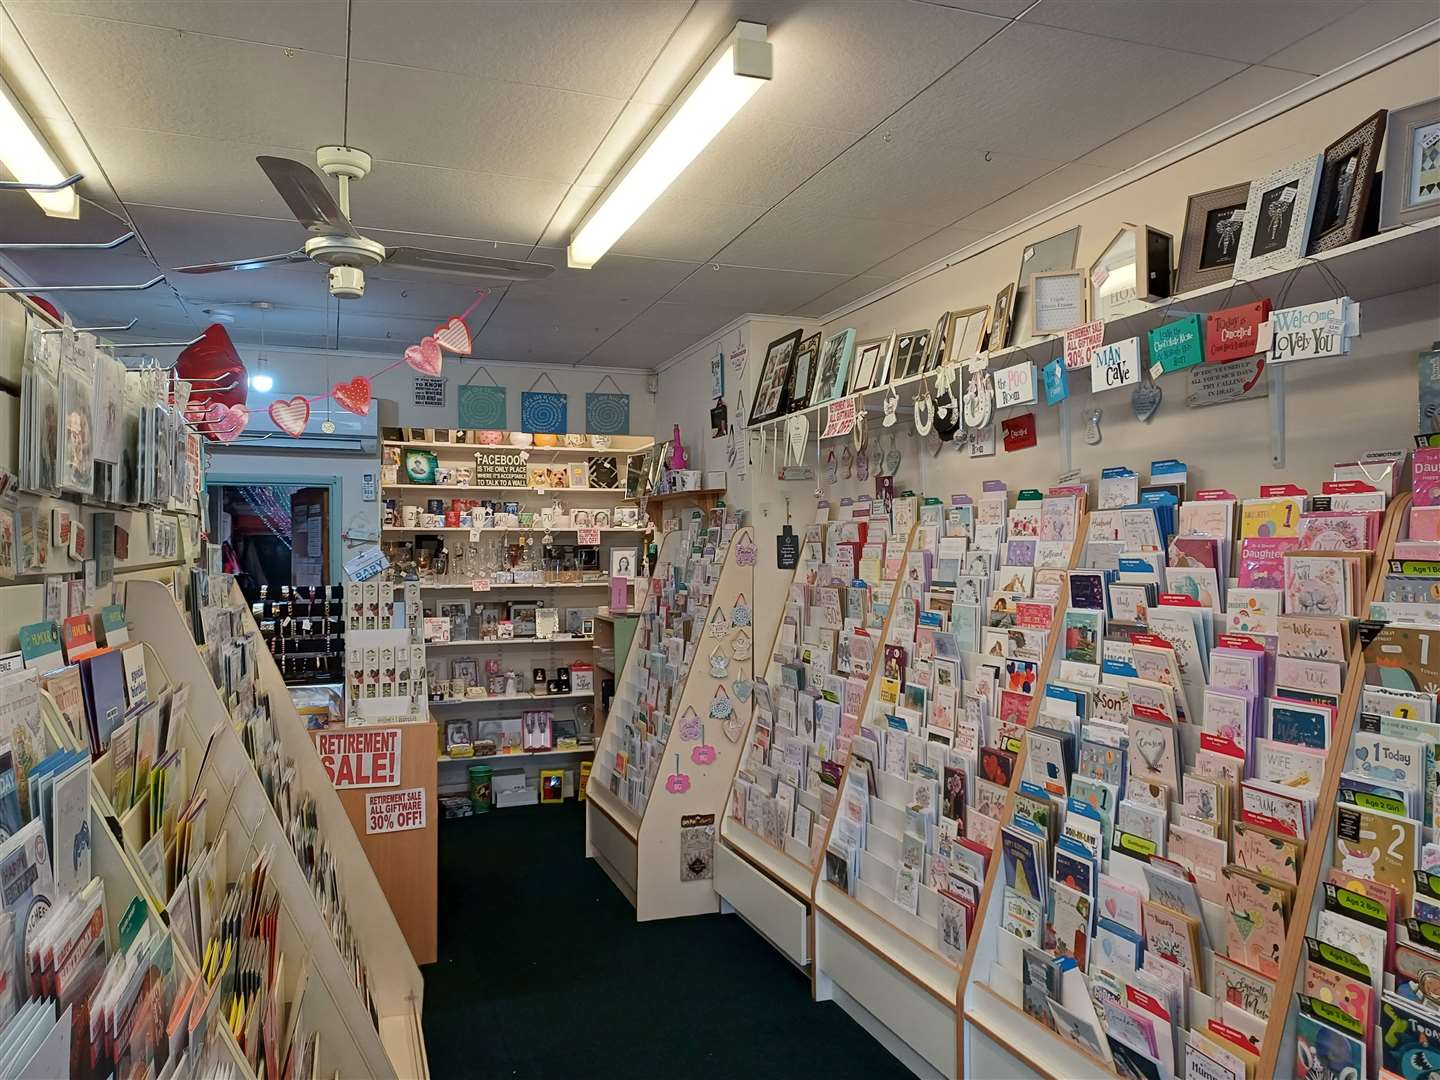 They sell cards, balloons, stationary and lots more